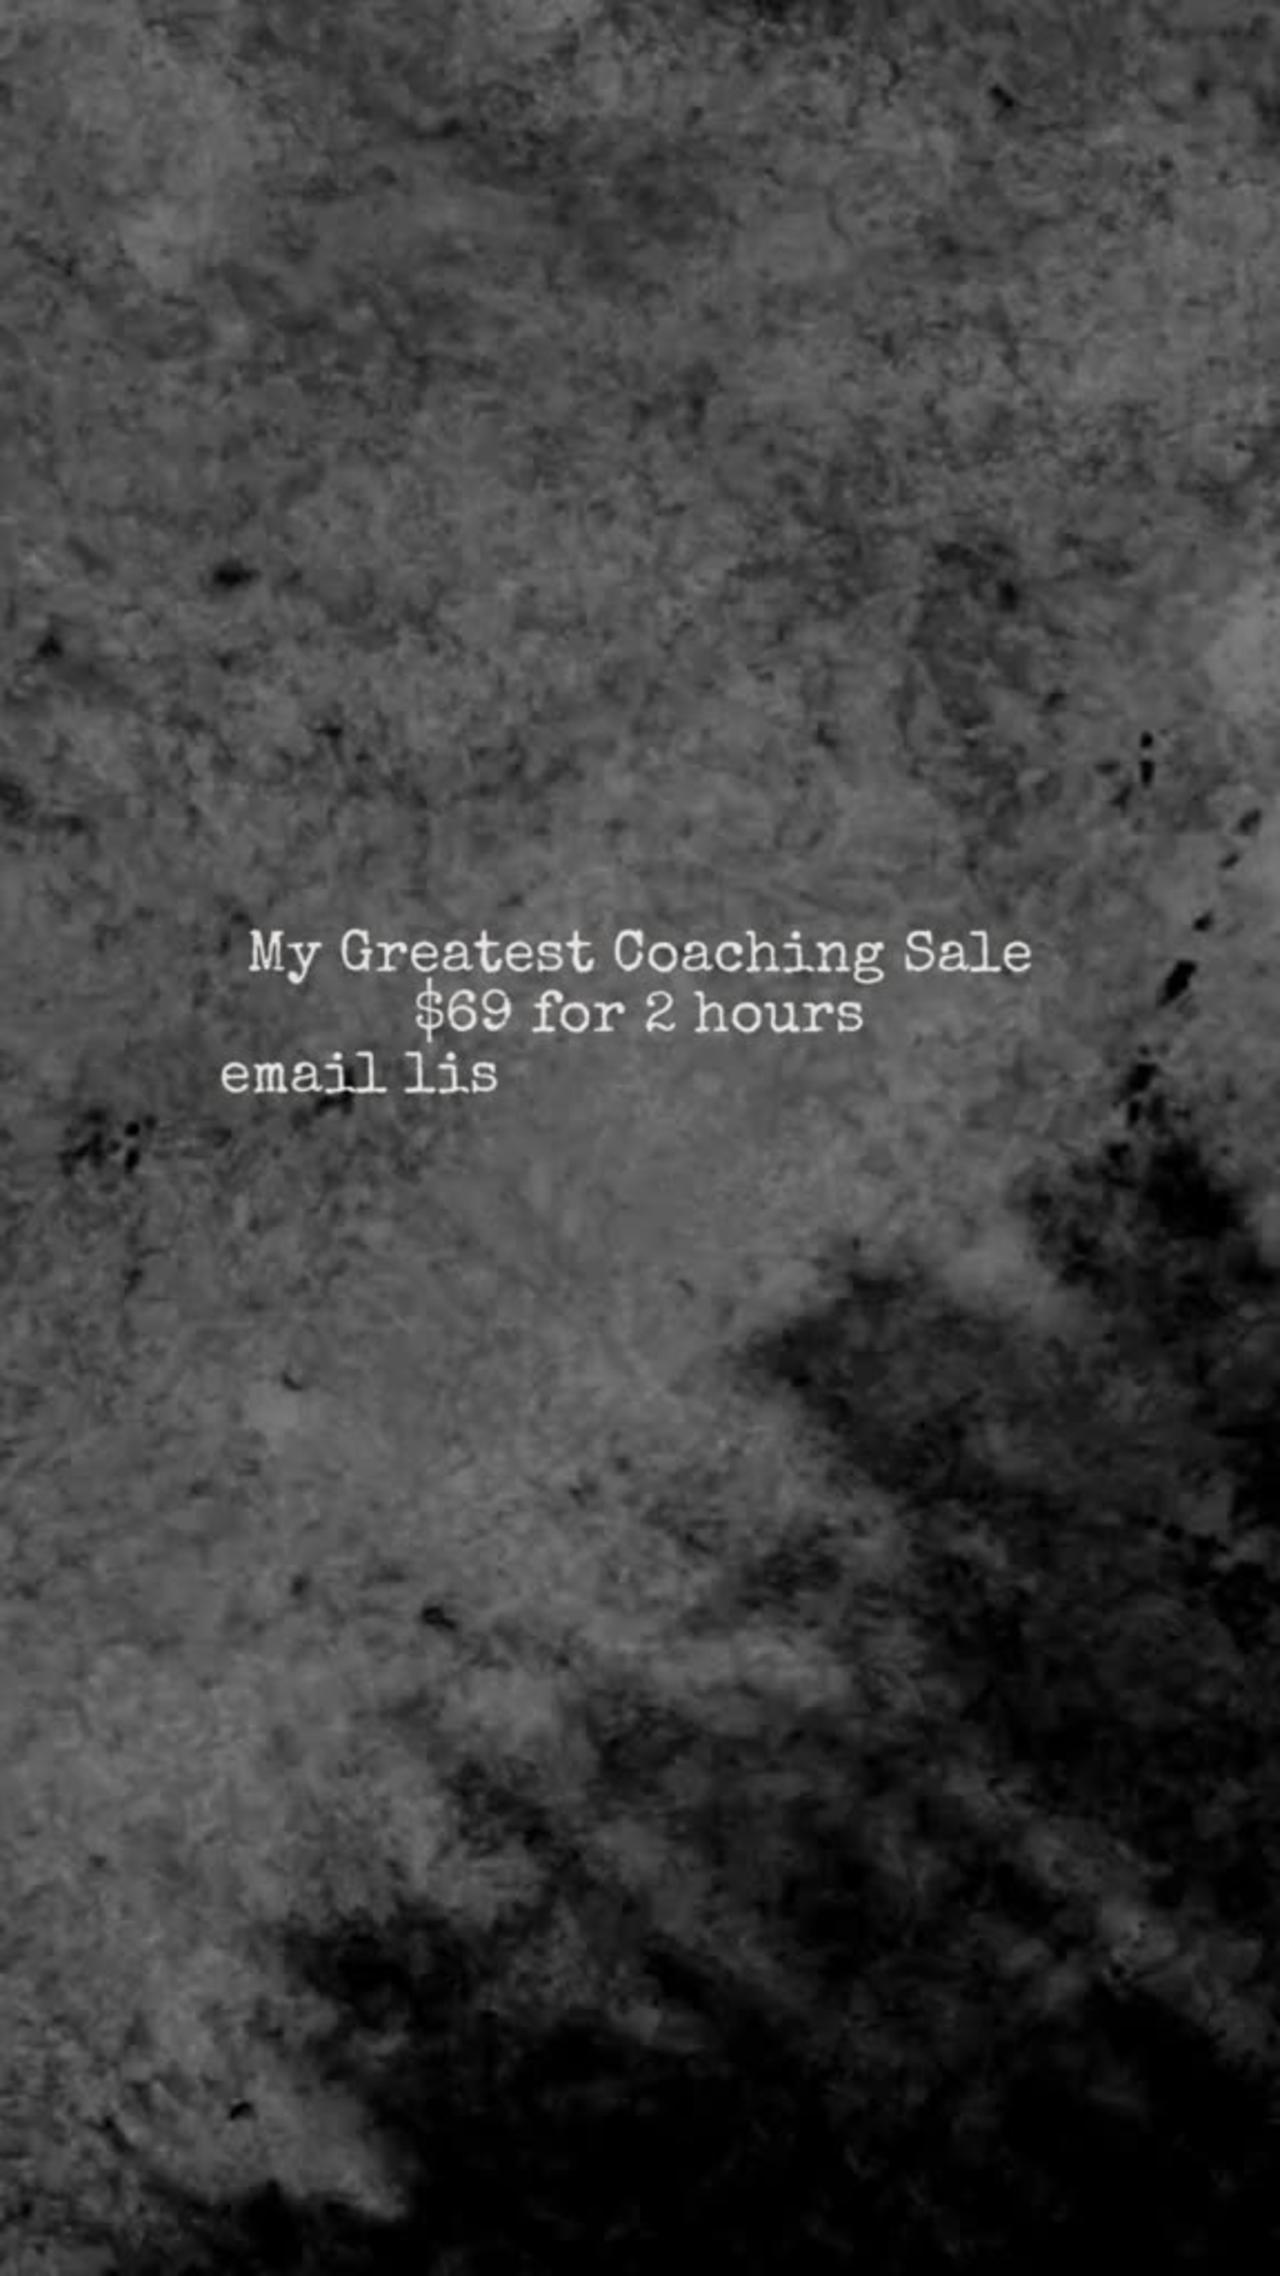 Best Coaching Sale Ever